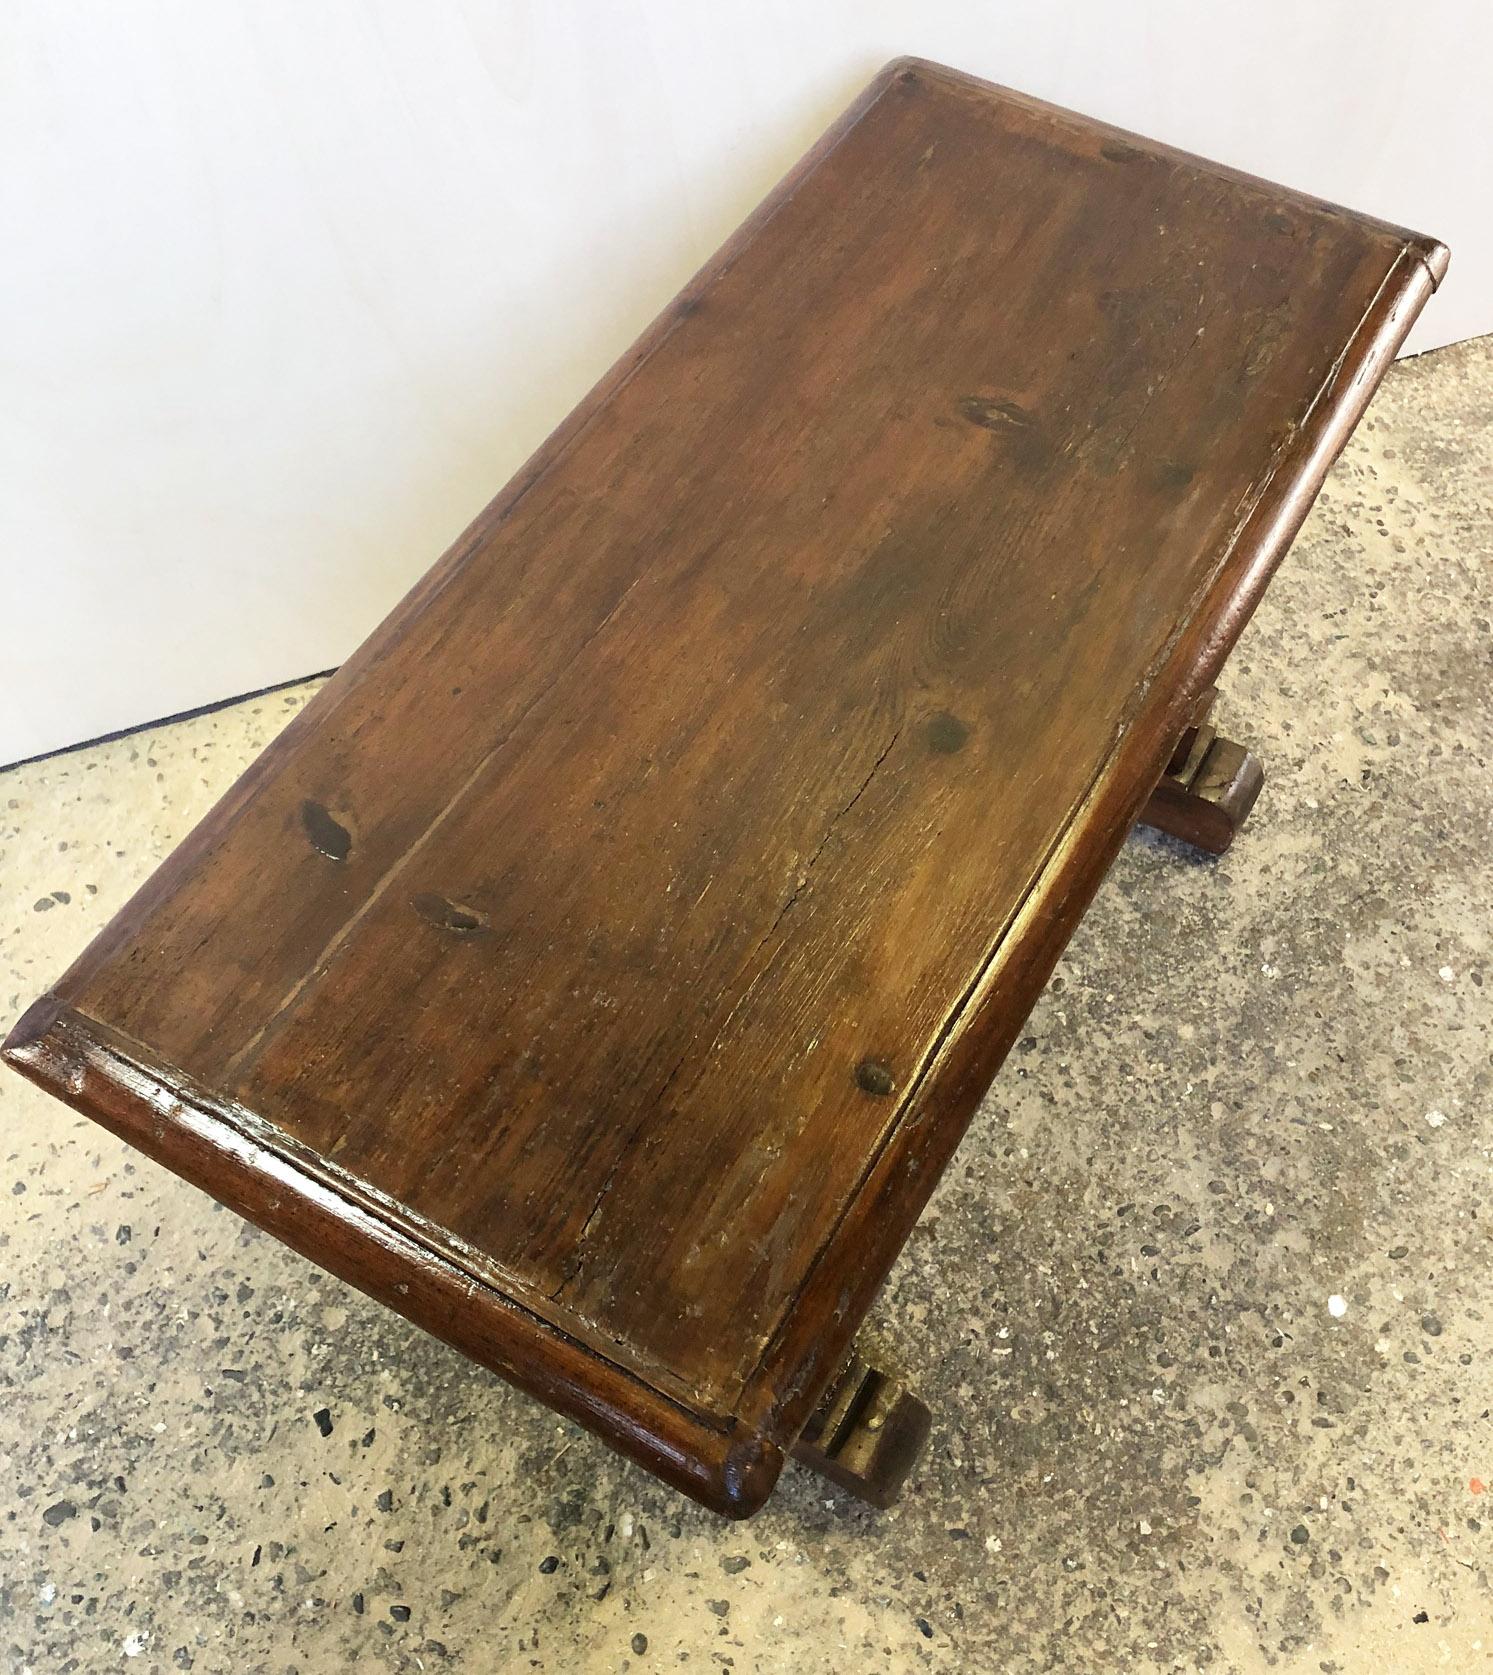 Italian Sofa Table from 1900 in Solid Fir, Very Sturdy, Honey Color, Rustic 2